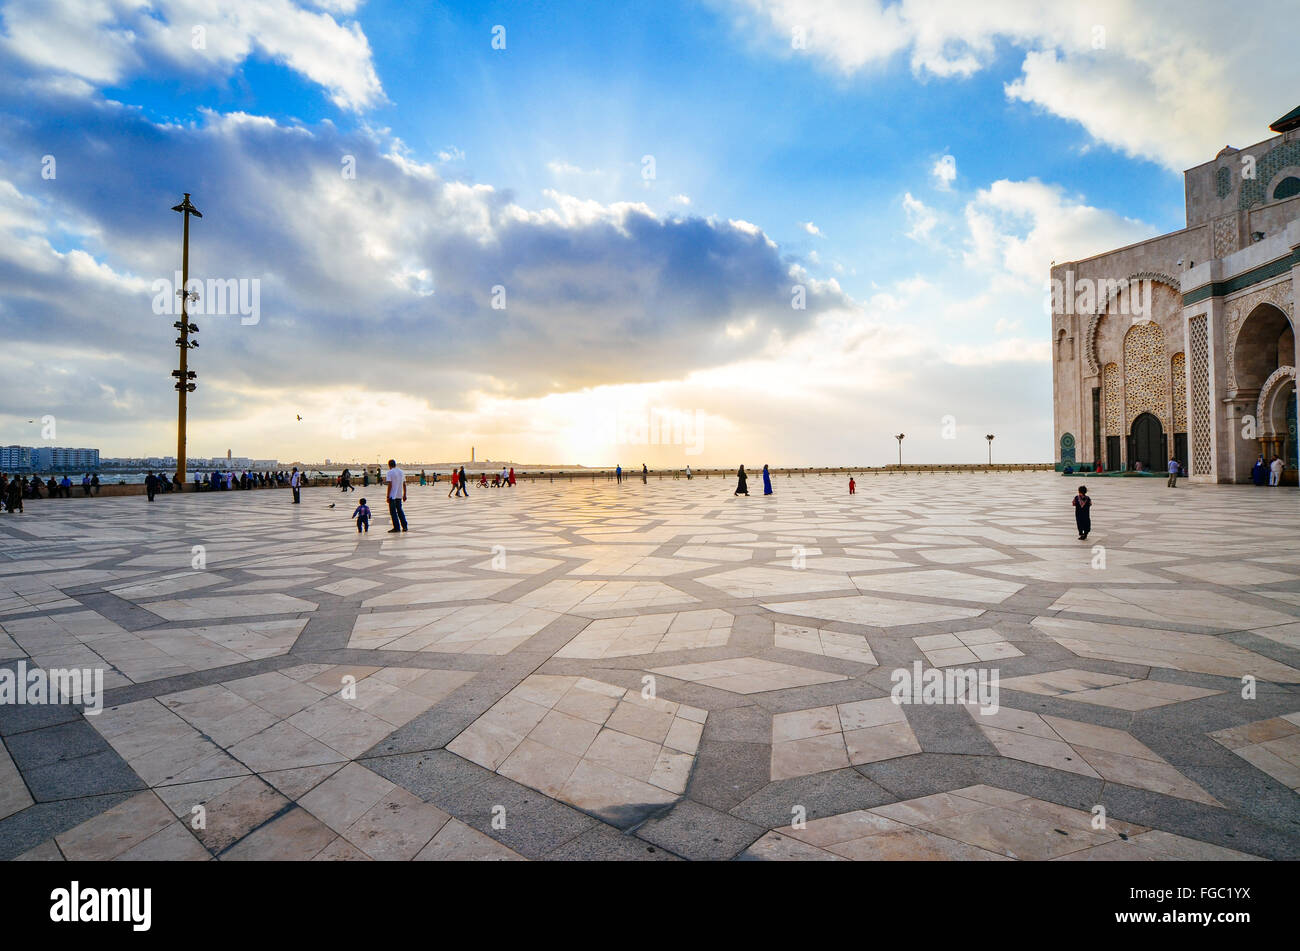 People At Mosque Hassan Ii Against Sky In City Stock Photo